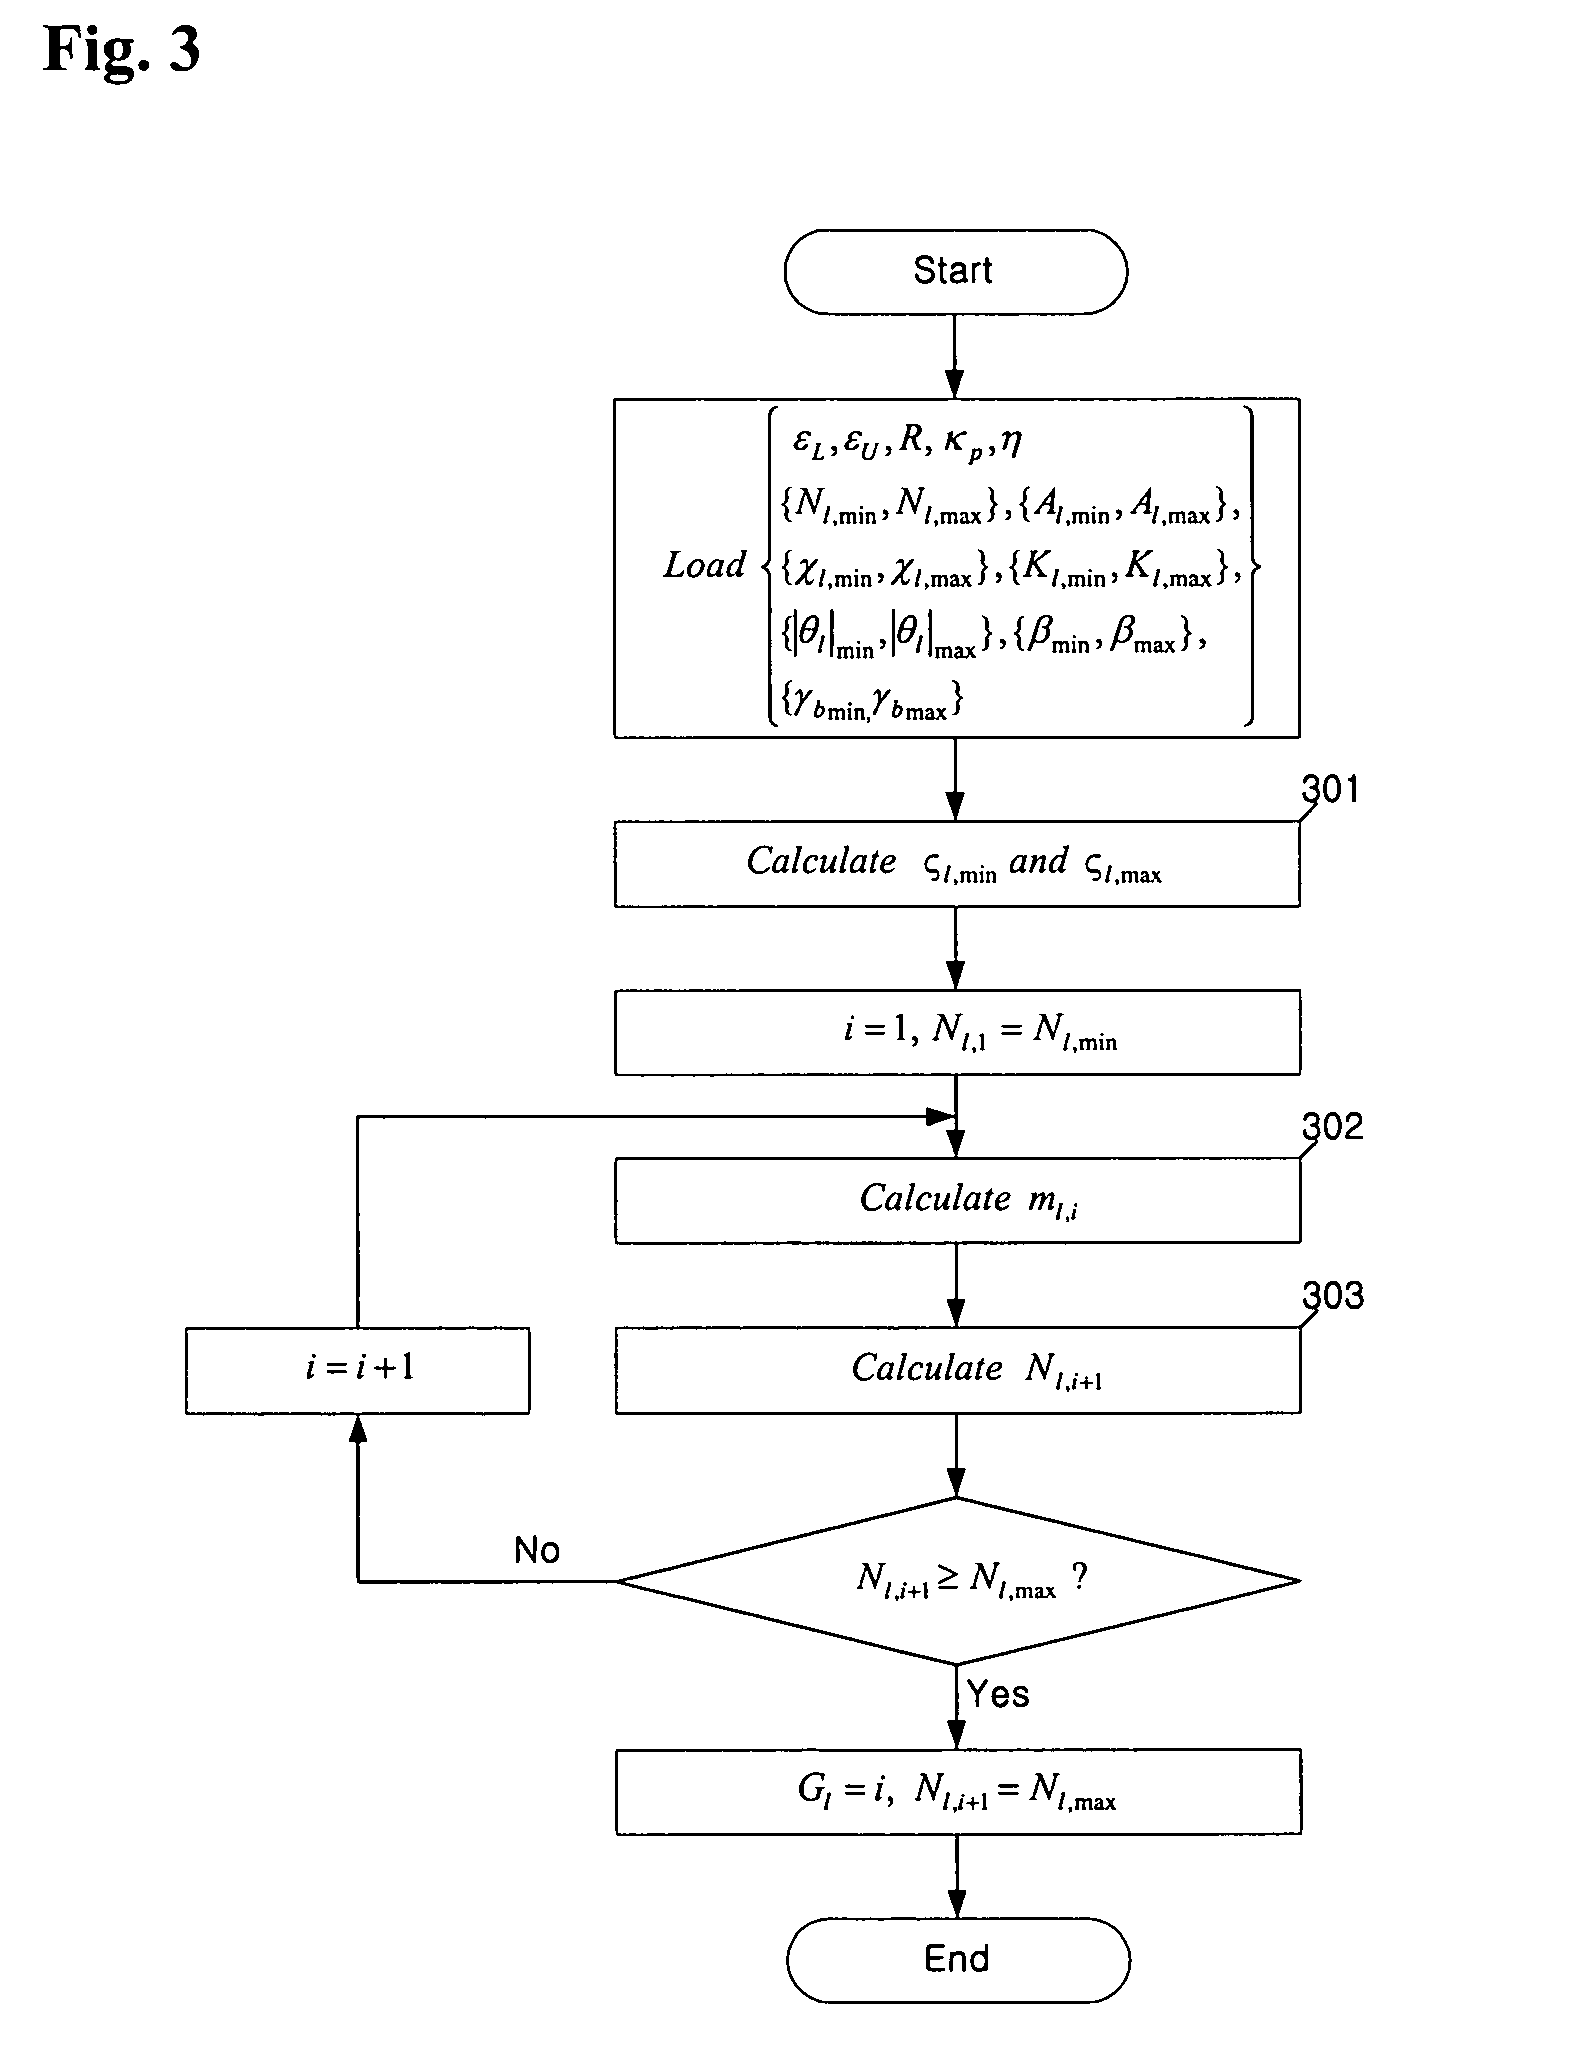 Method and apparatus for direct sequence spread spectrum receiver using an adaptive channel estimator